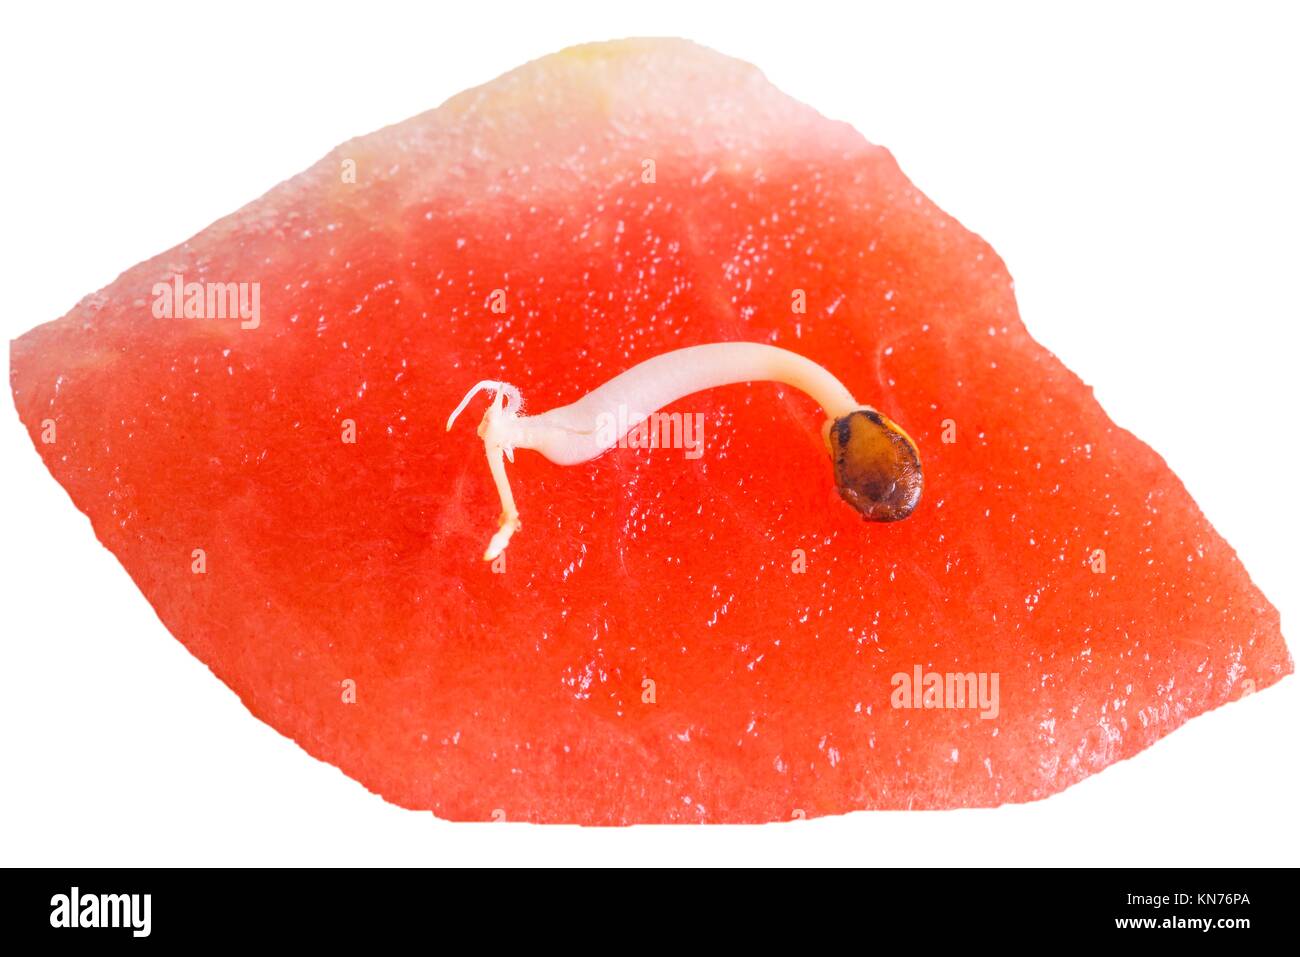 germ of a watermelon. Stock Photo